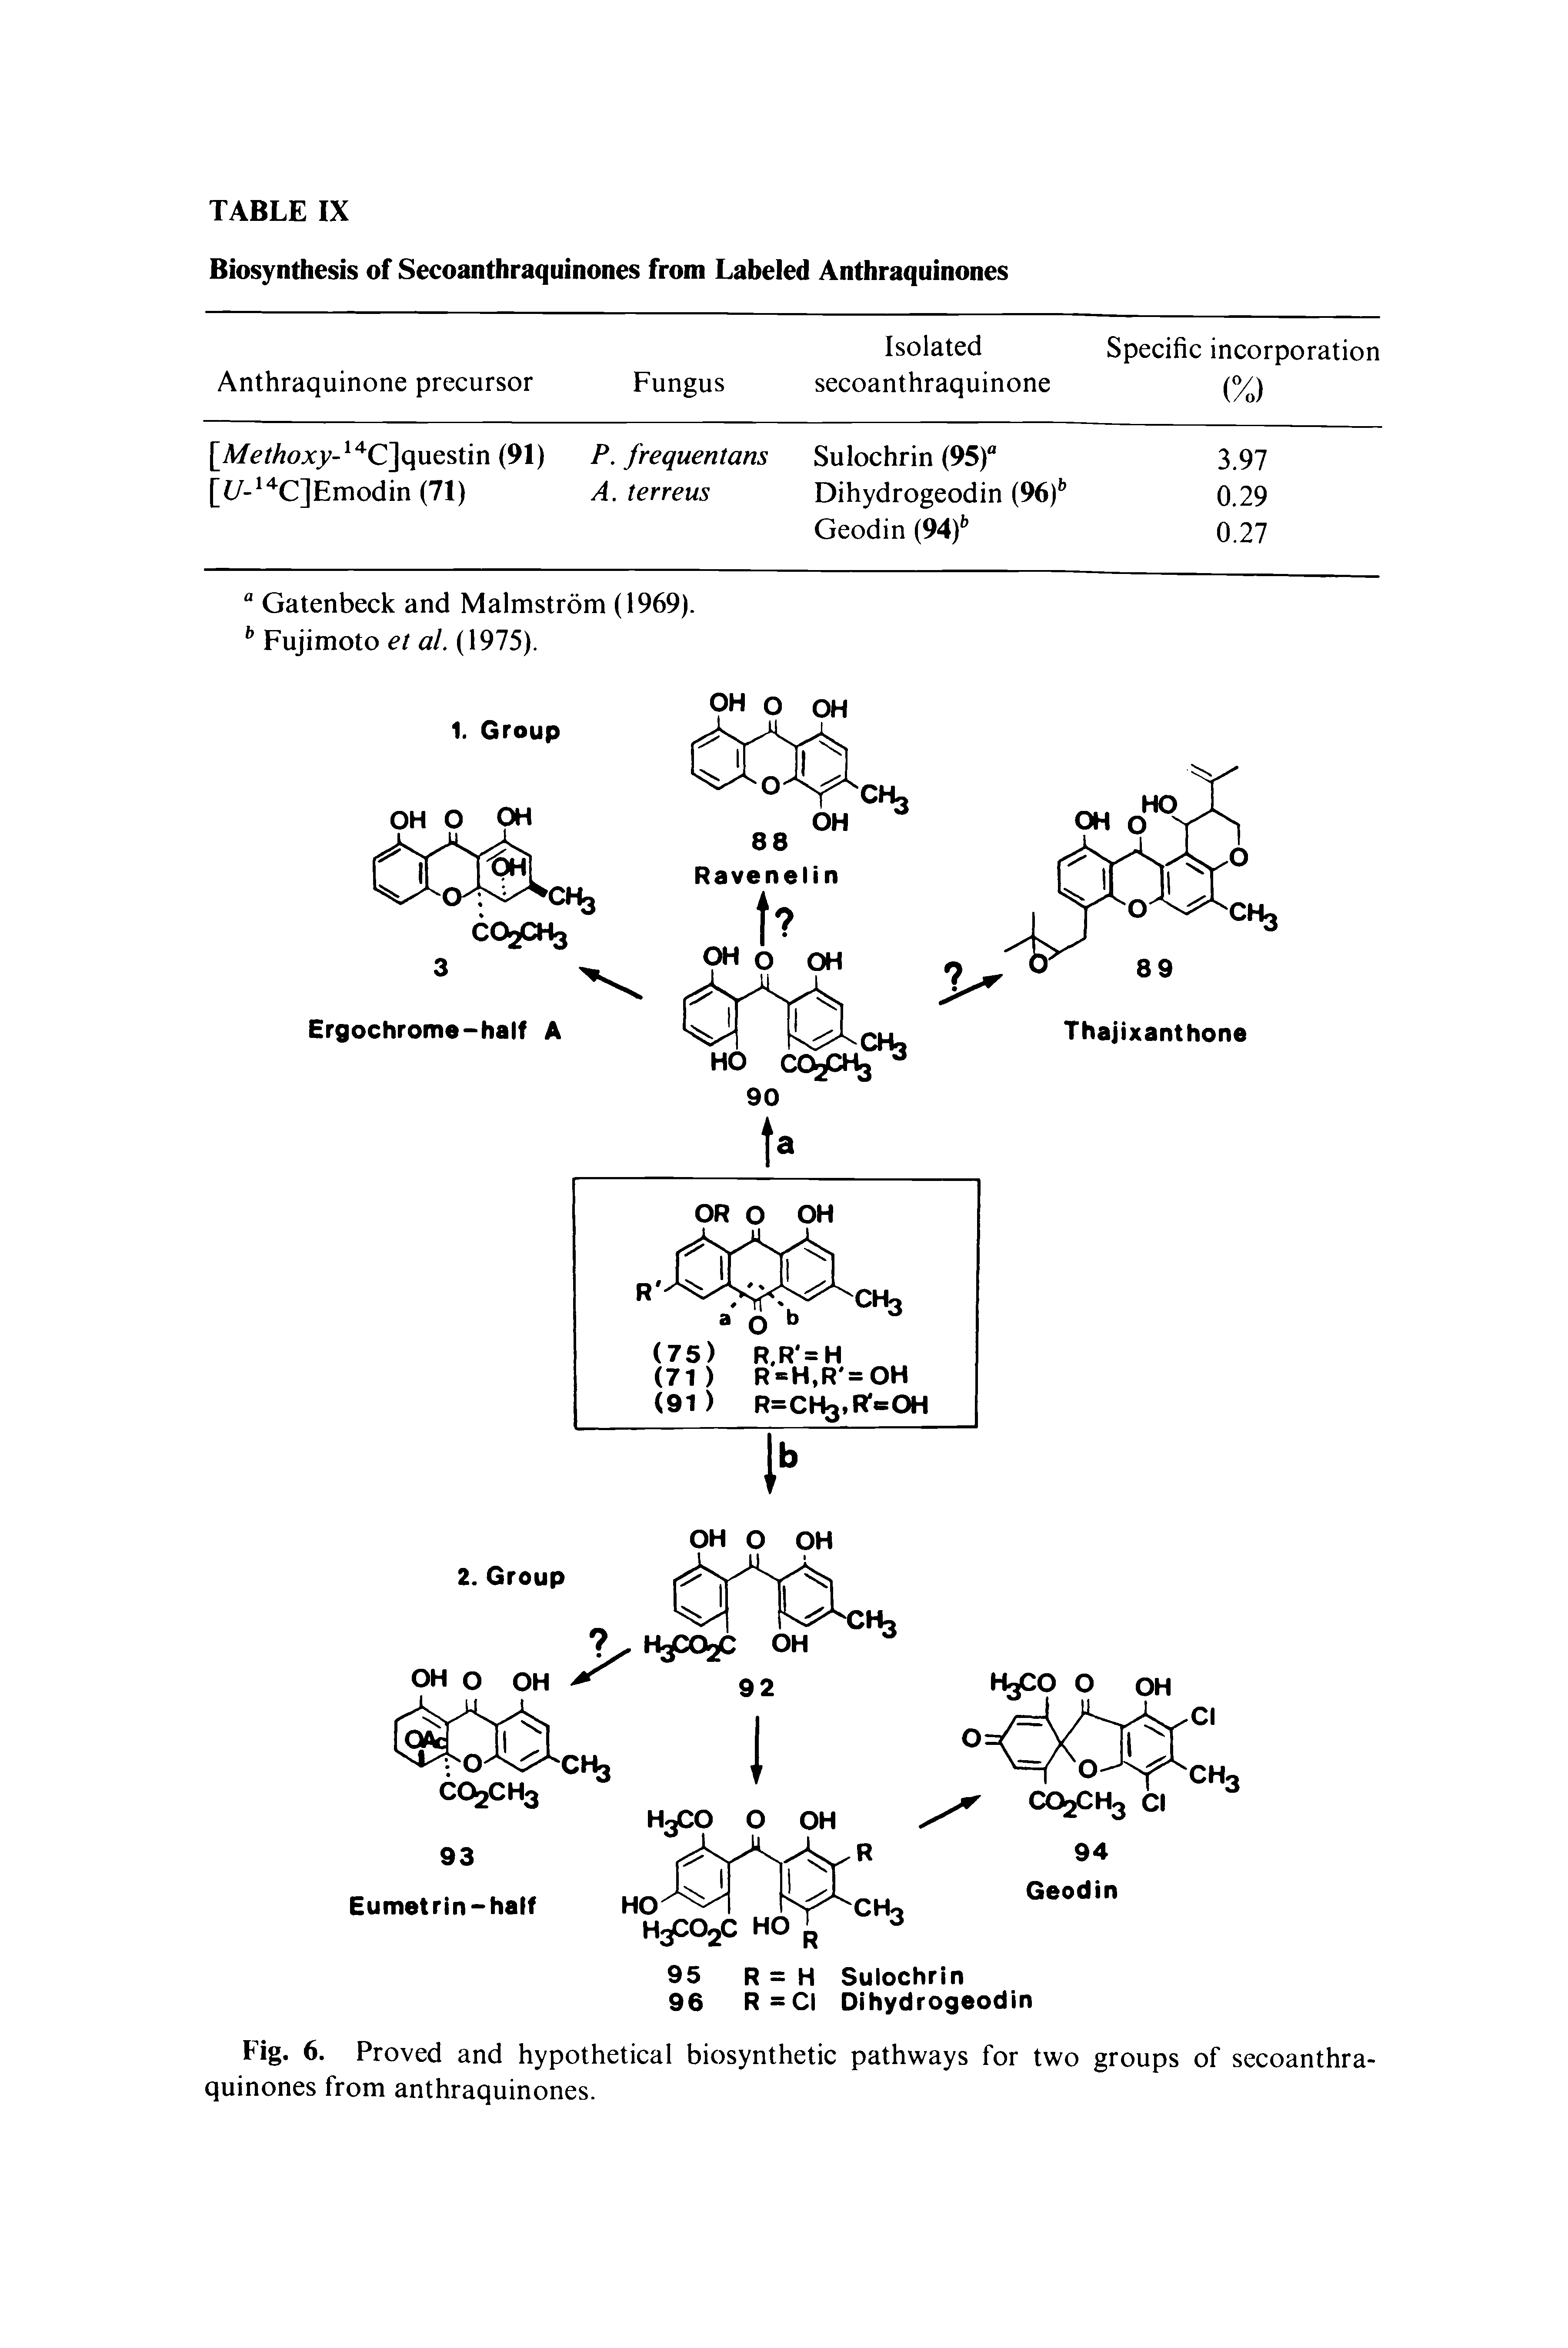 Fig. 6. Proved and hypothetical biosynthetic pathways for two groups of secoanthraquinones from anthraquinones.